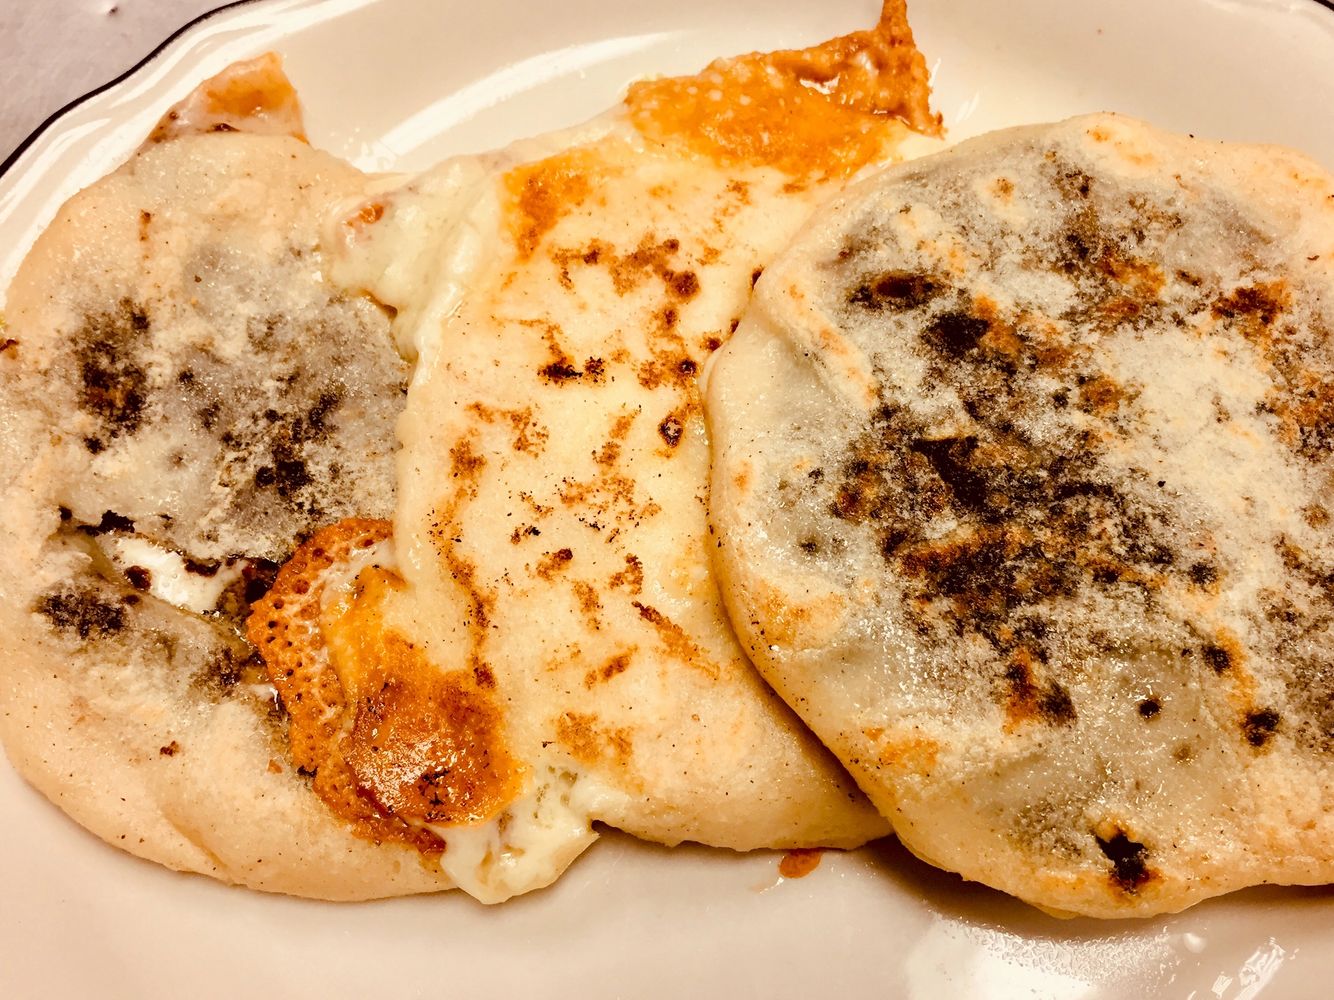 Three round, overlapping pupusas on a plate. The middle pupusa has crispy cheese edges.